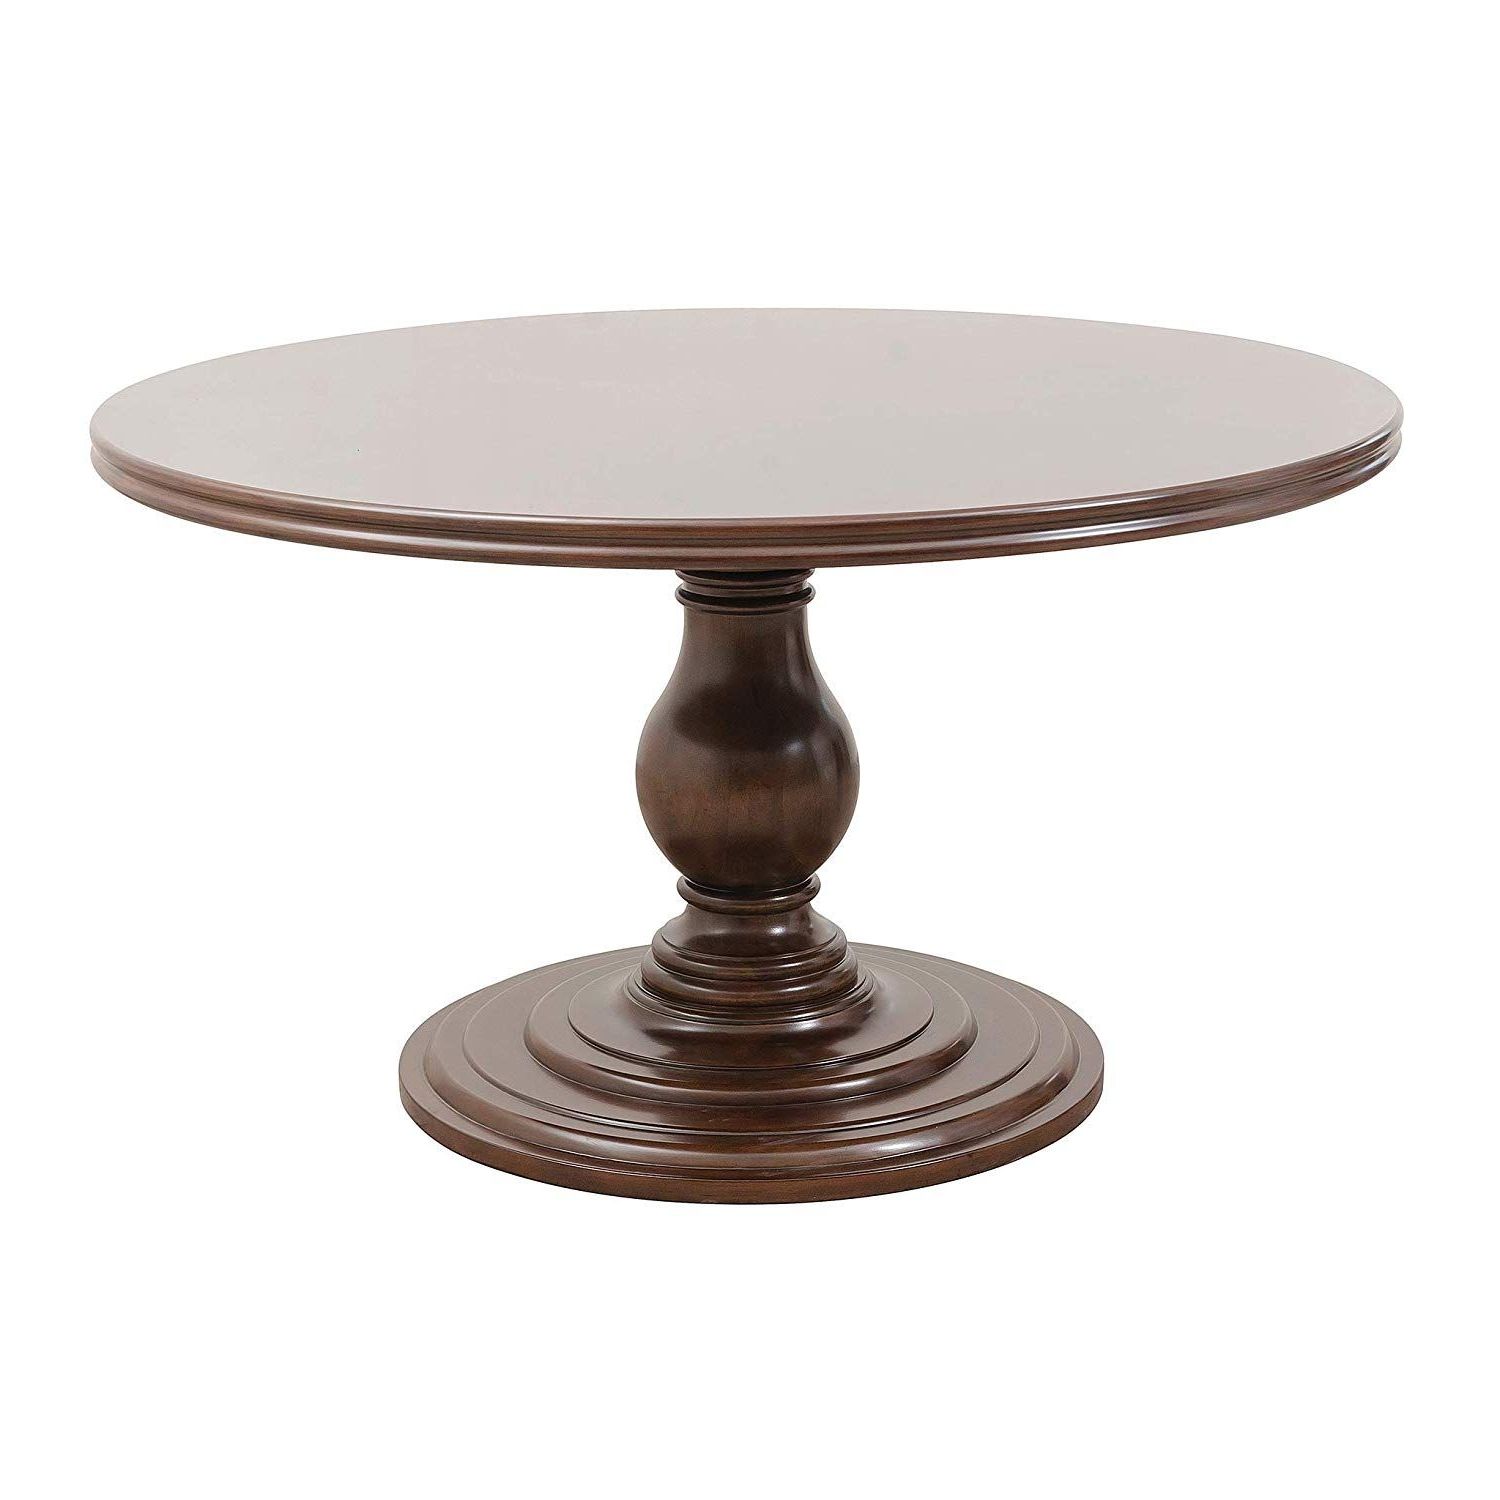 Most Current Aztec Round Pedestal Dining Tables Pertaining To Homelegance Oratorio 54 Round Pedestal Dining Table, Dark (View 3 of 25)